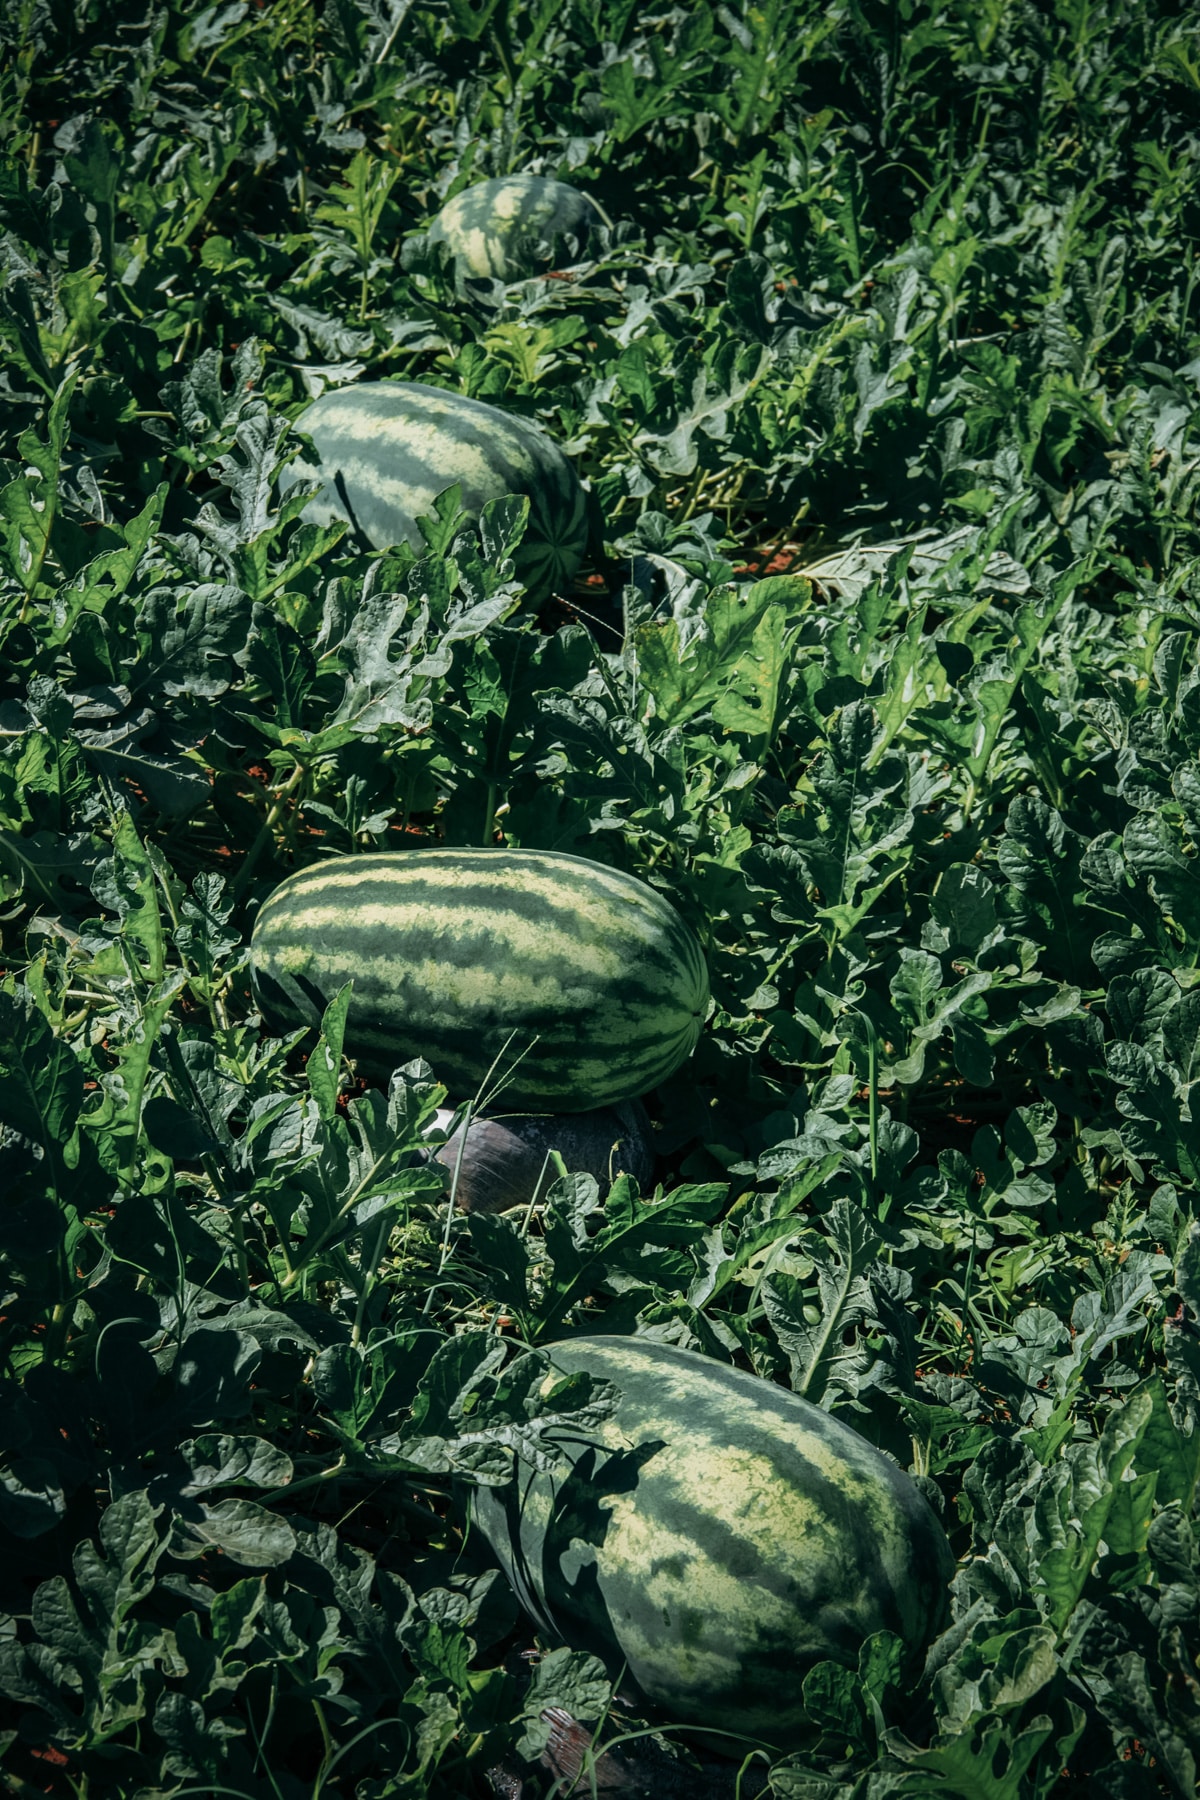 Four large oblong watermelons growing in a field. 